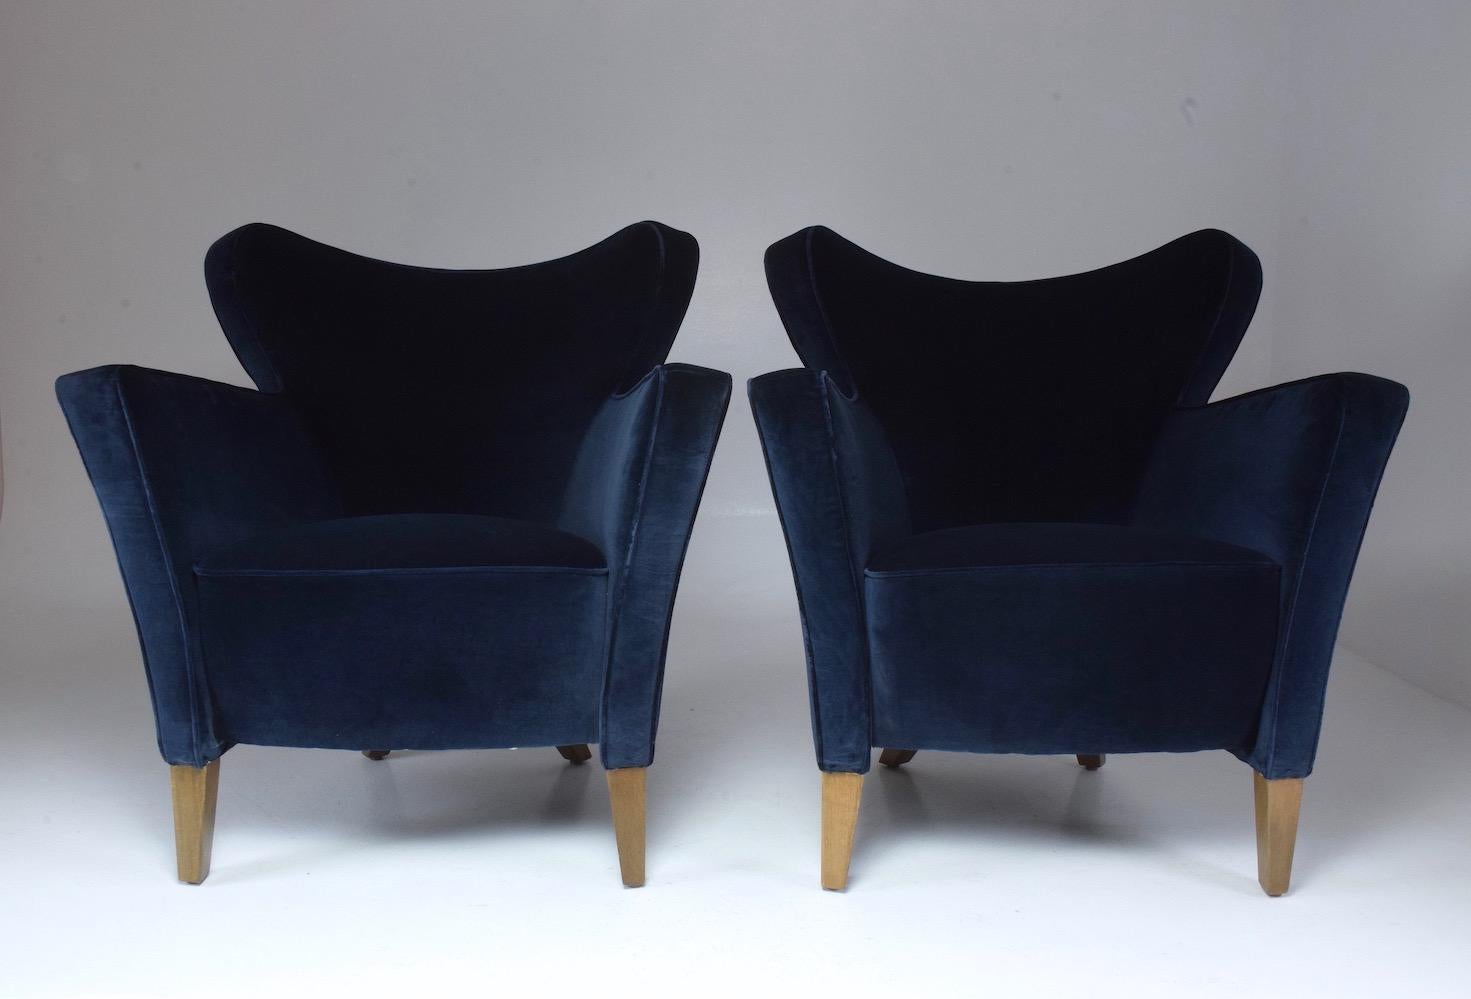 Pair of 20th century vintage armchairs designed in a typical curved 1950s style and 1940s feet and decorative zipper at the back fully restored in same original style.
France, circa 1980s.
 